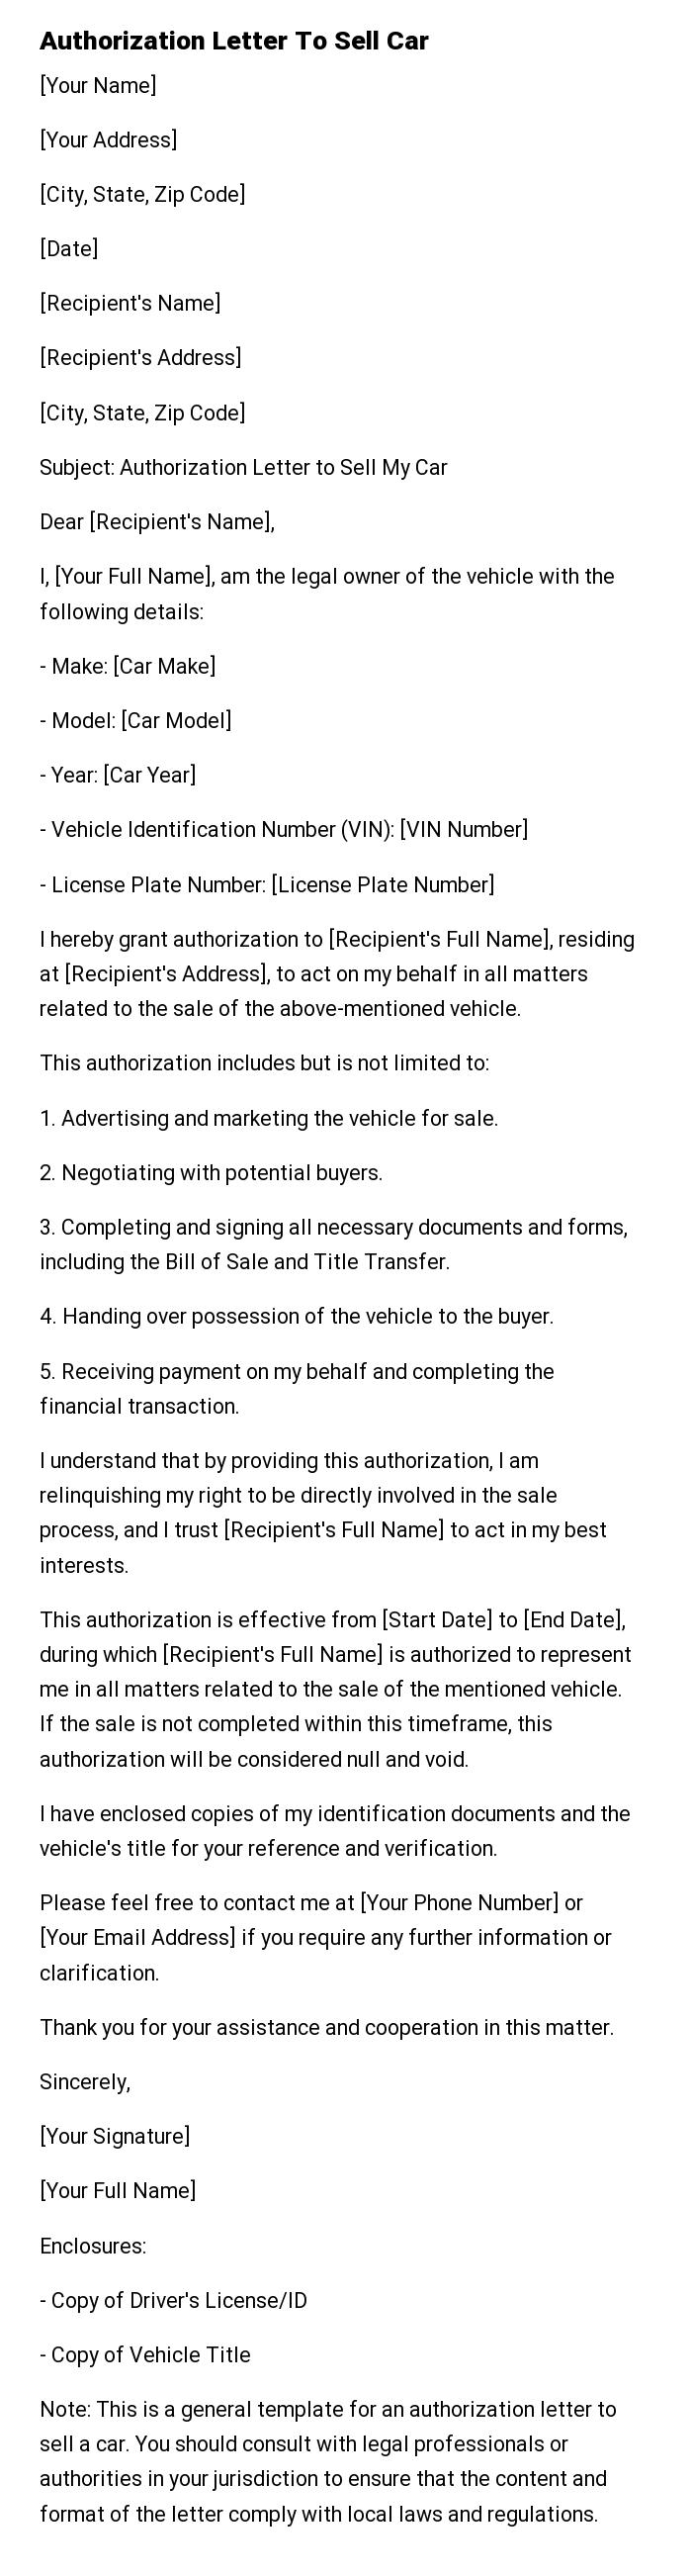 Authorization Letter To Sell Car